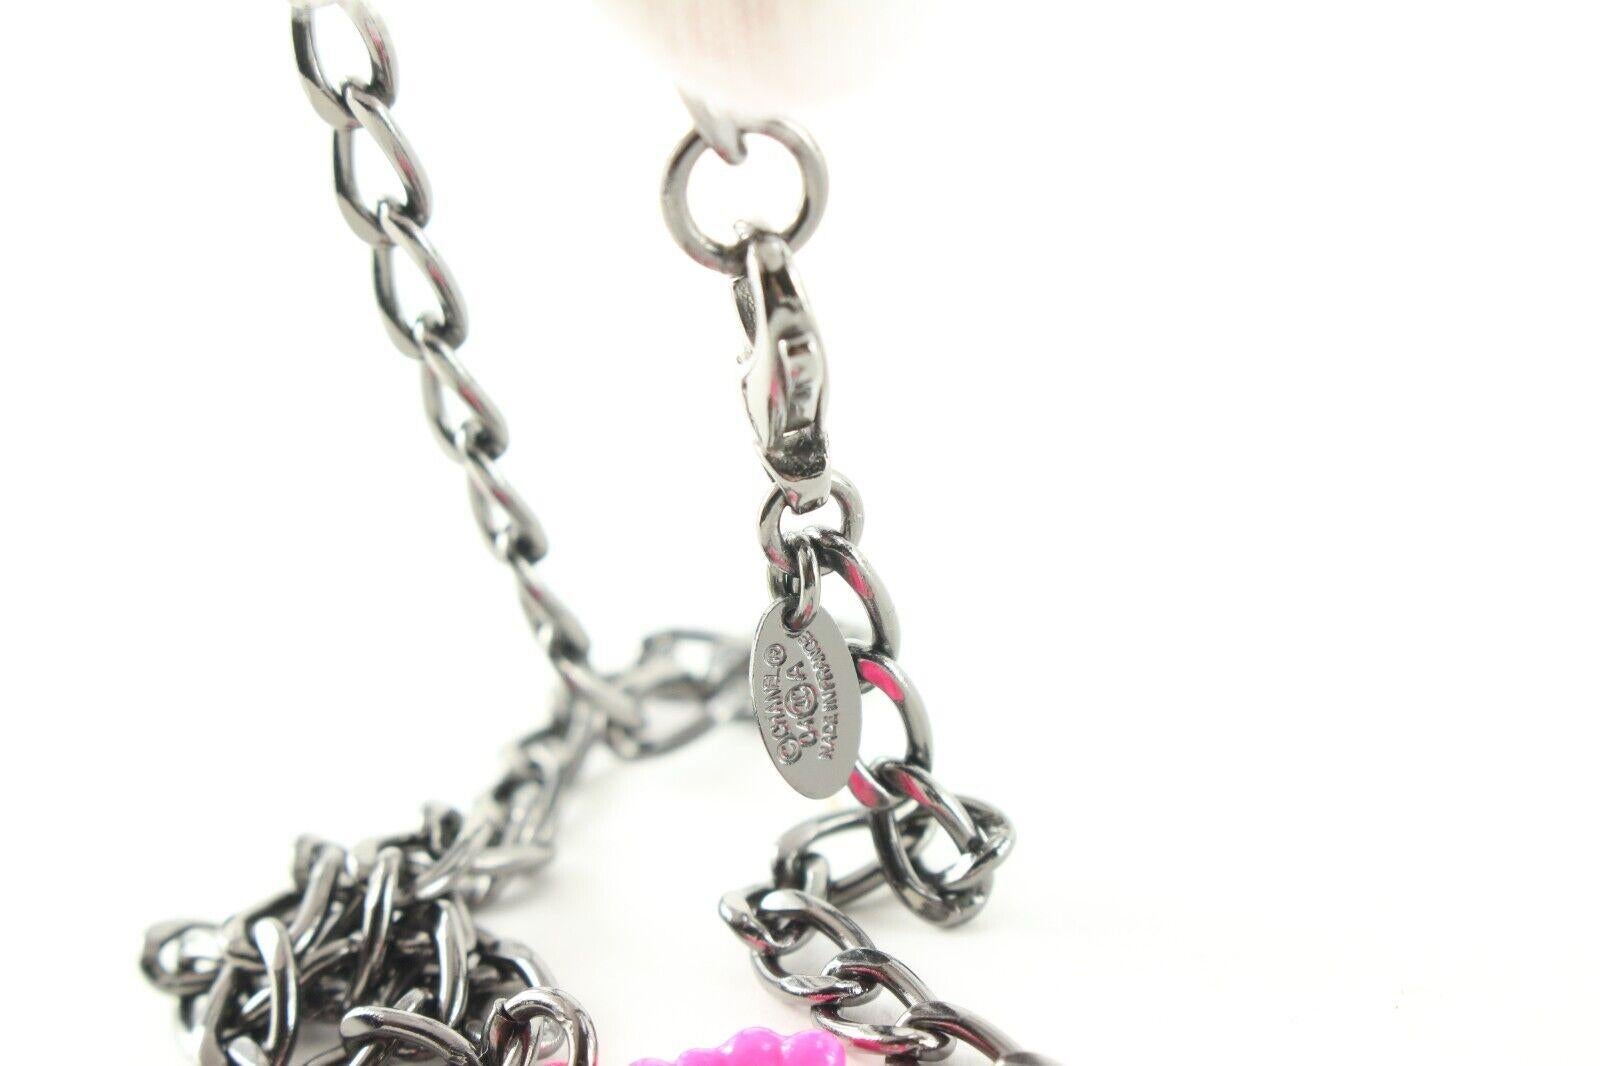 Chanel 04a Pink CC Necklace Chain Jewelry 2CK419C

Date Code/Serial Number: 04 A

Made In: France

Measurements: Length: 16